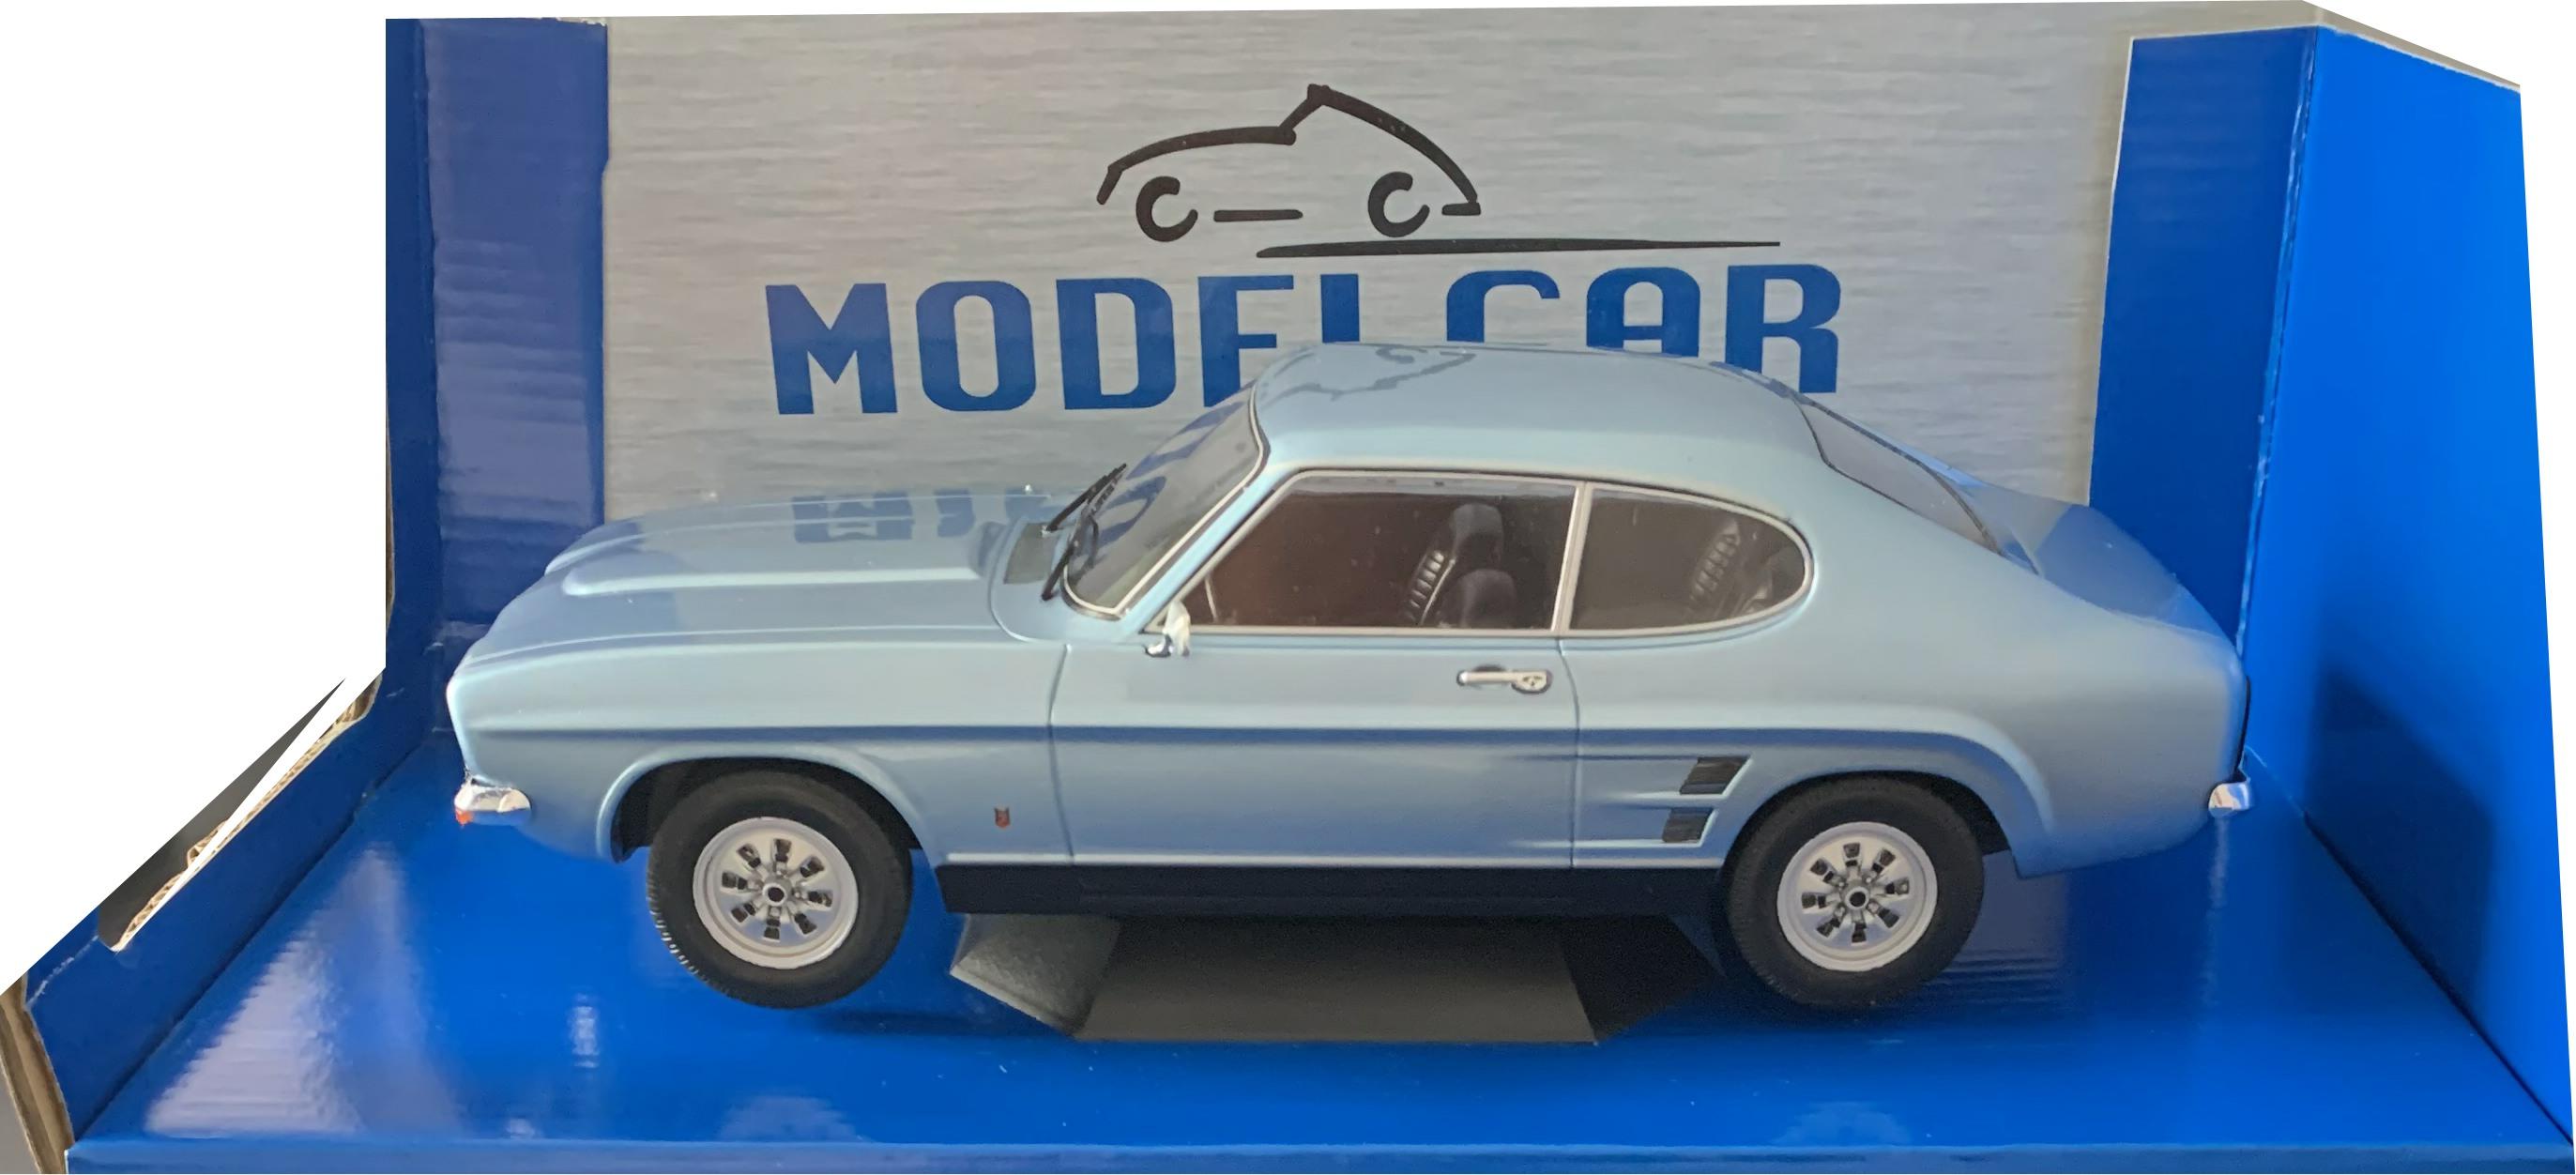 An excellent scale model of the Ford Capri 1600XL with high level of detail throughout, all authentically recreated. Model is presented in a window display box. The car is approx. 23 cm long and the presentation box is 32 cm long